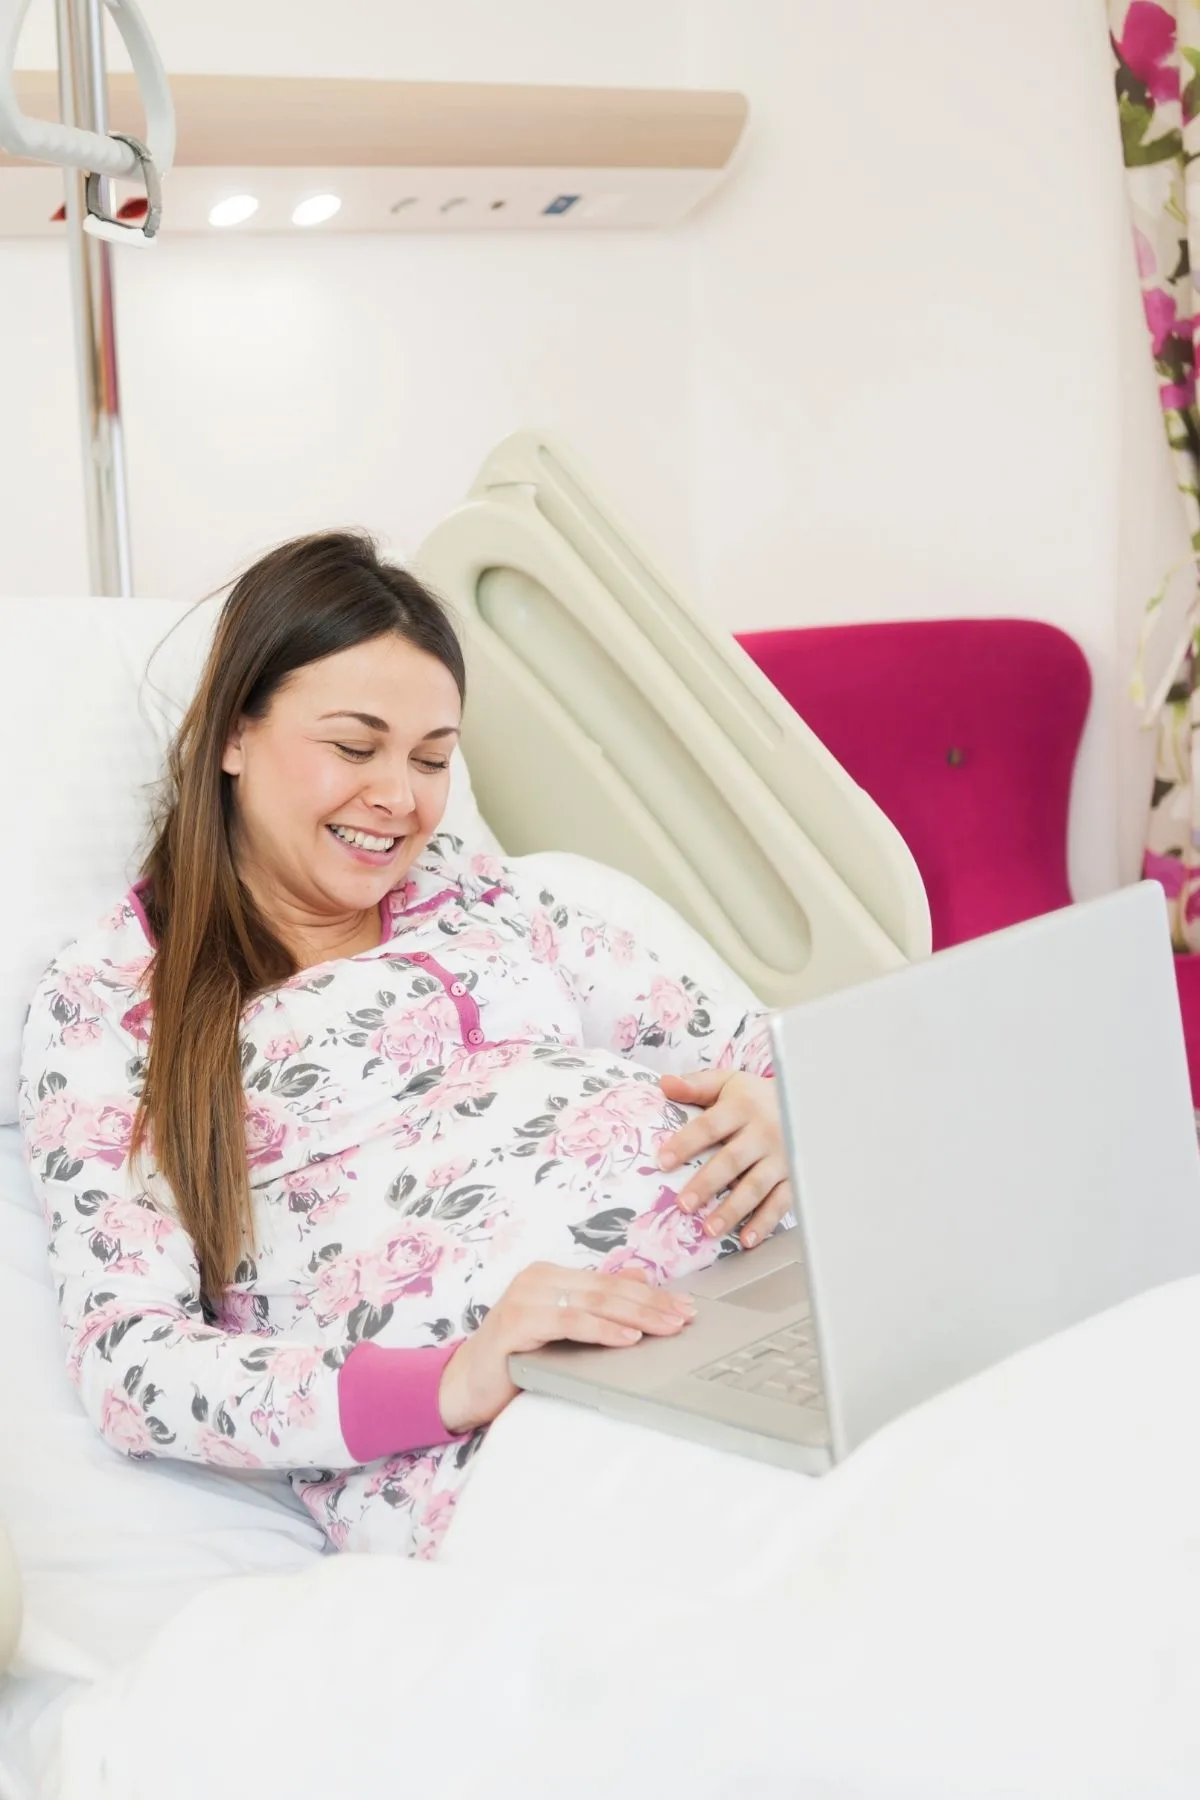 Pregnant woman in hospital bed uses her laptop computer for distraction during labor.